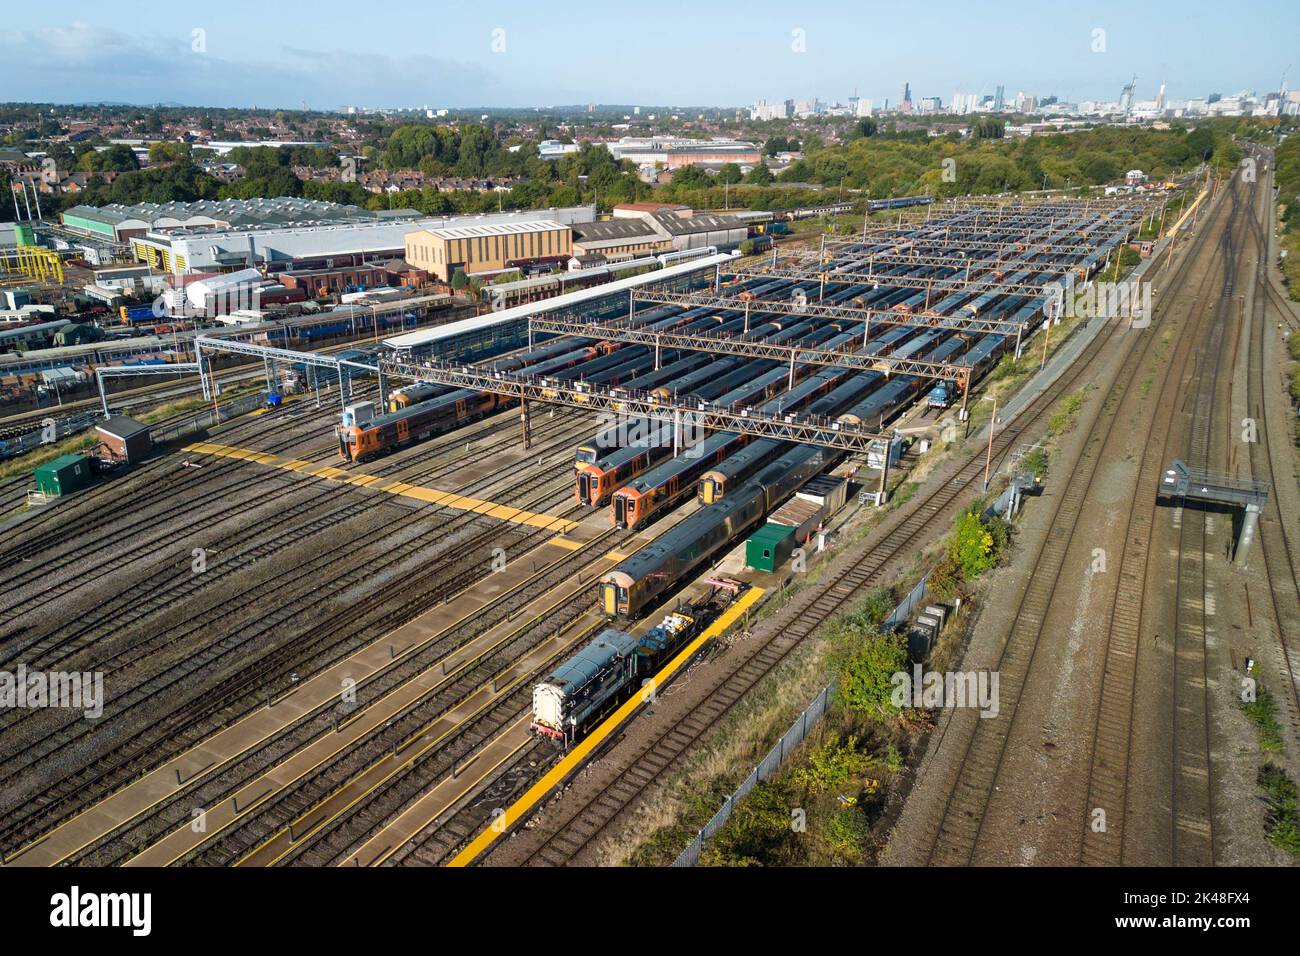 Tyseley, Birmingham, UK. October 1st 2022 - Unused and parked West Midlands Railway trains at the Tyseley train maintenance depot with the Birmingham skyline in the distance as rail workers take part in continued strike action. Pic by Credit: Scott CM/Alamy Live News Stock Photo